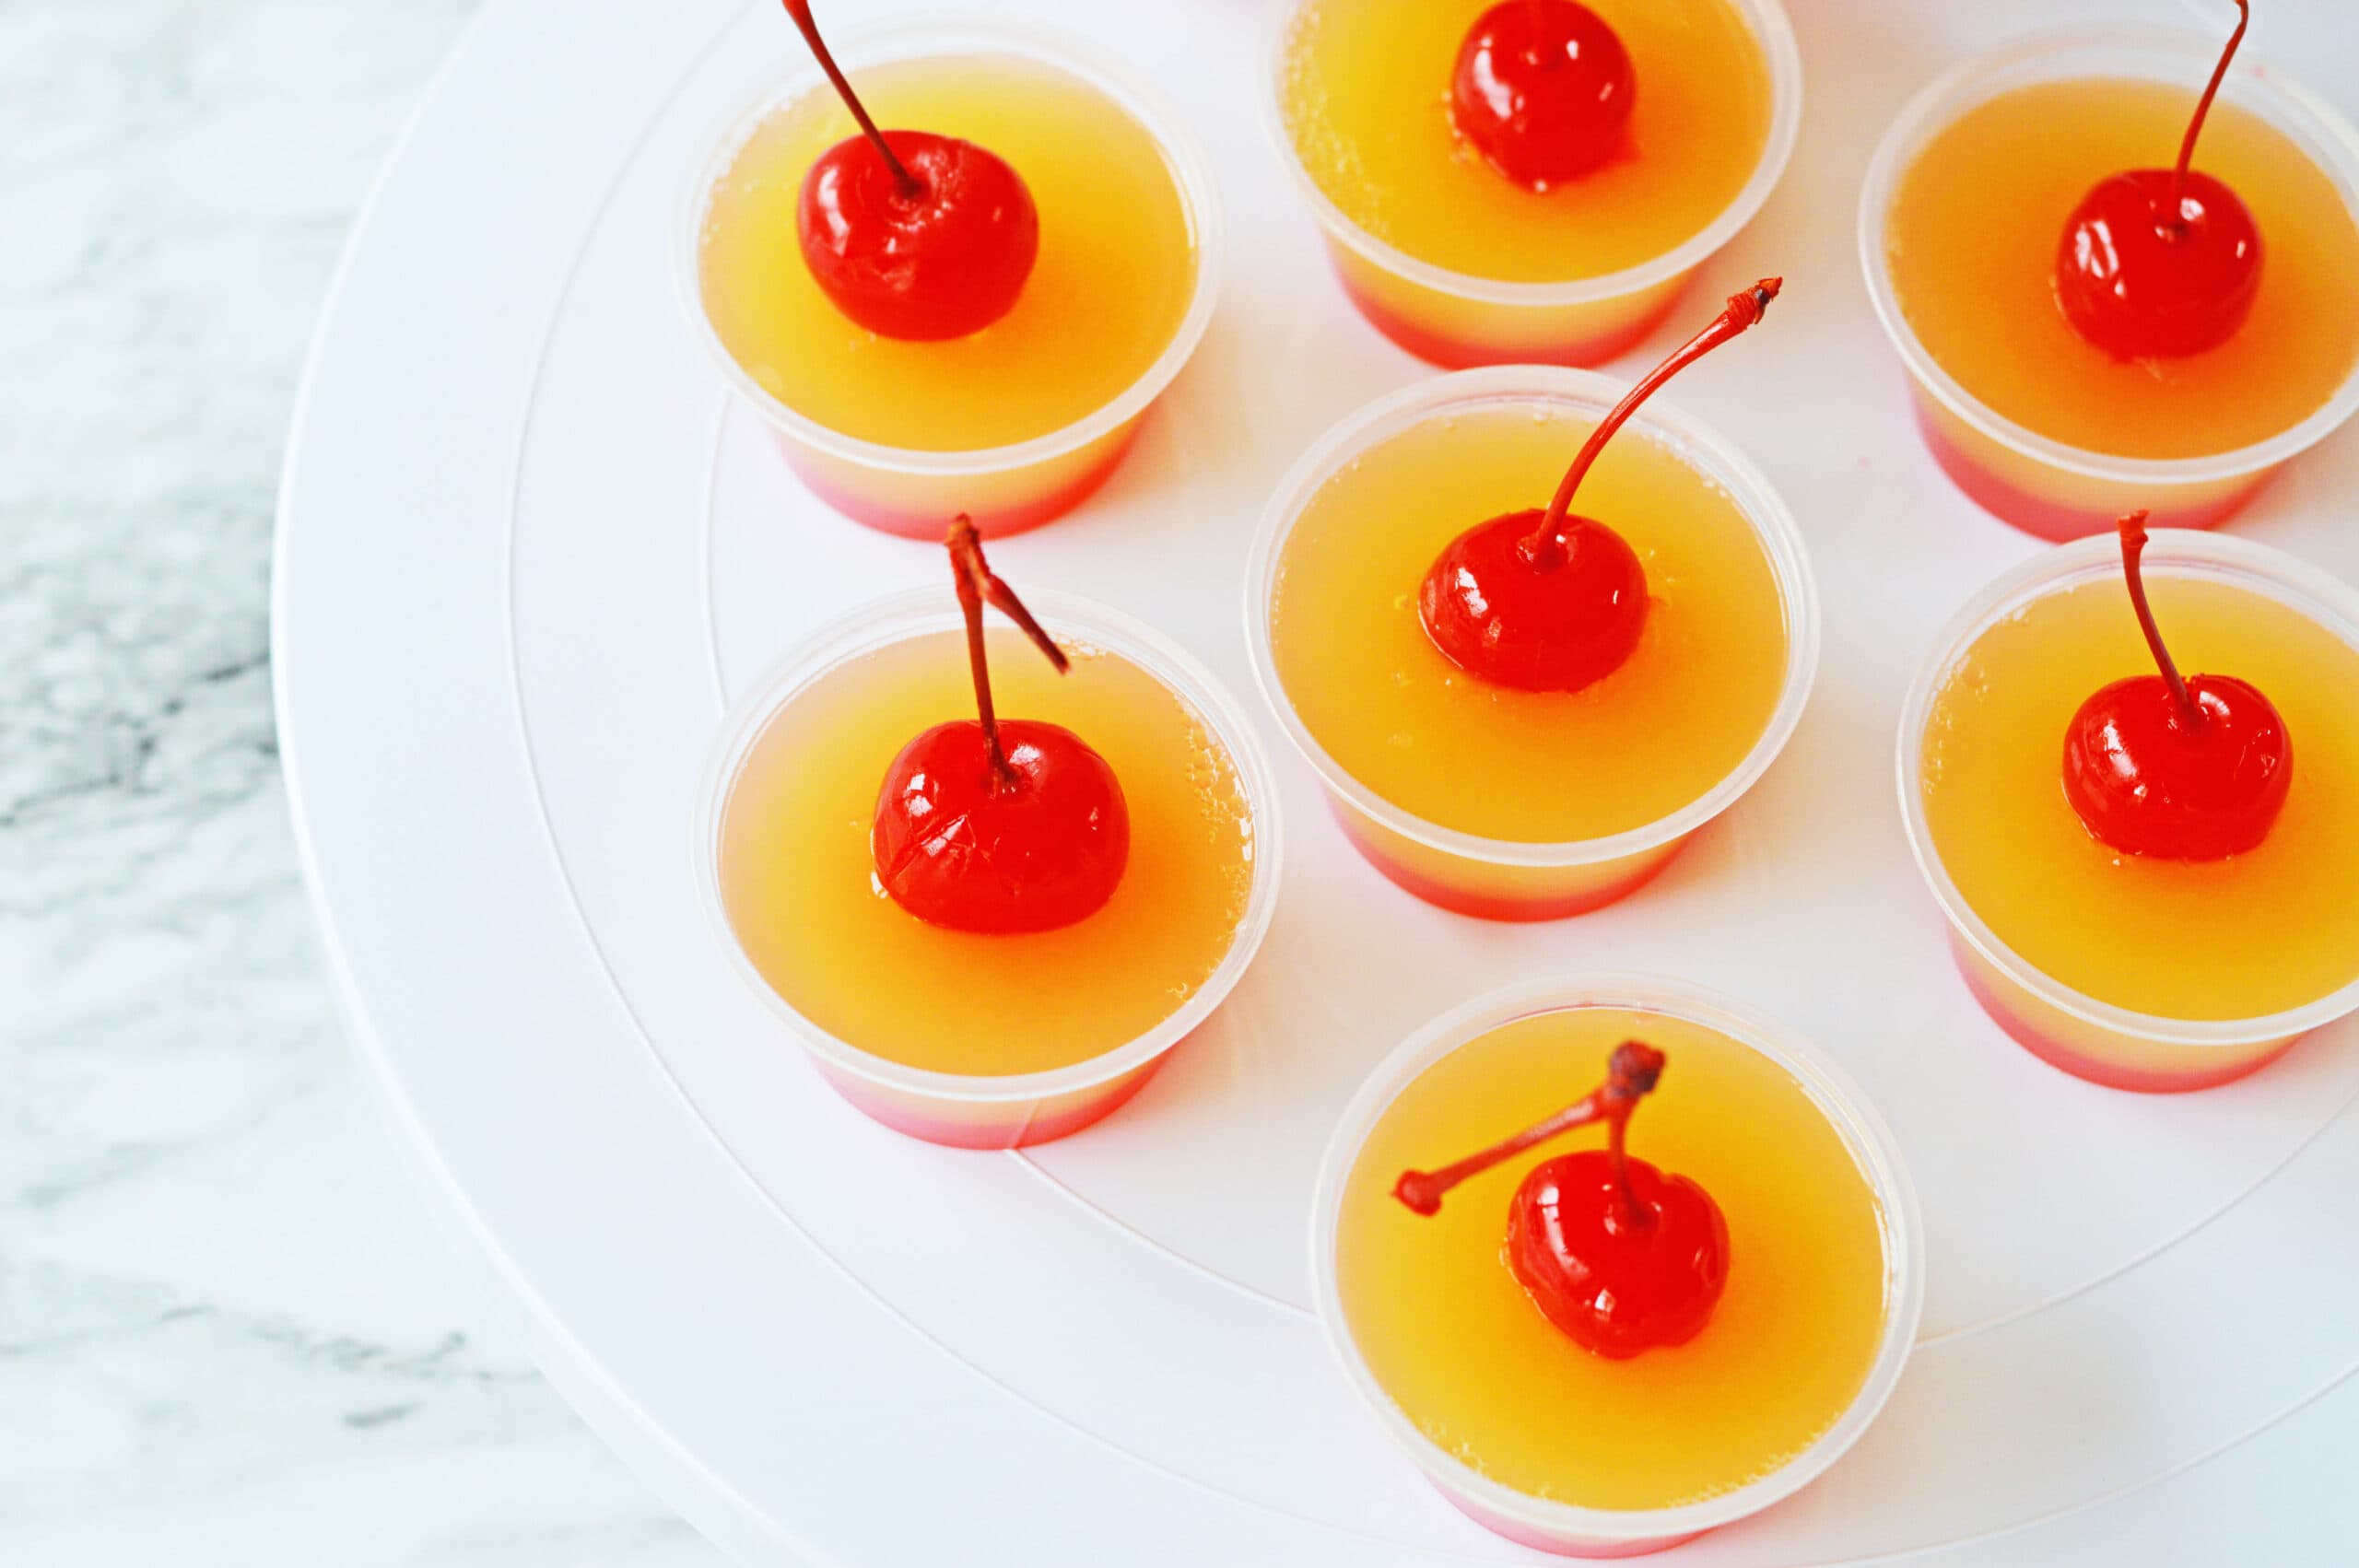 Pineapple upside down jello shots from above